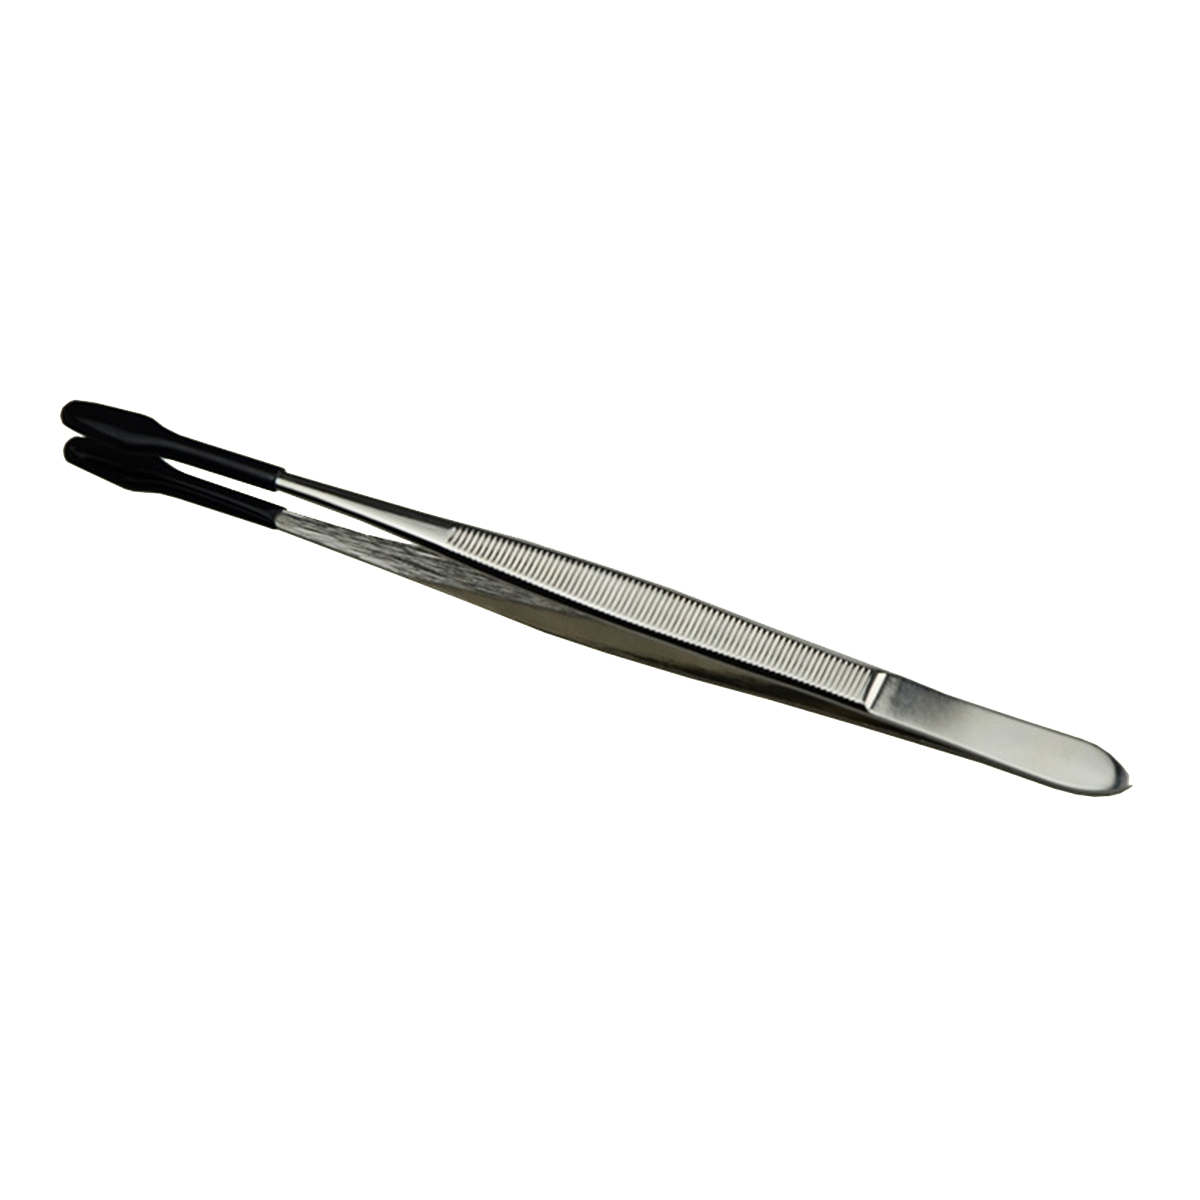 15cm-Stainless-Steel-Tweezer-for-JewelryCoinStamp-Collection-Handling-Tool-1353175